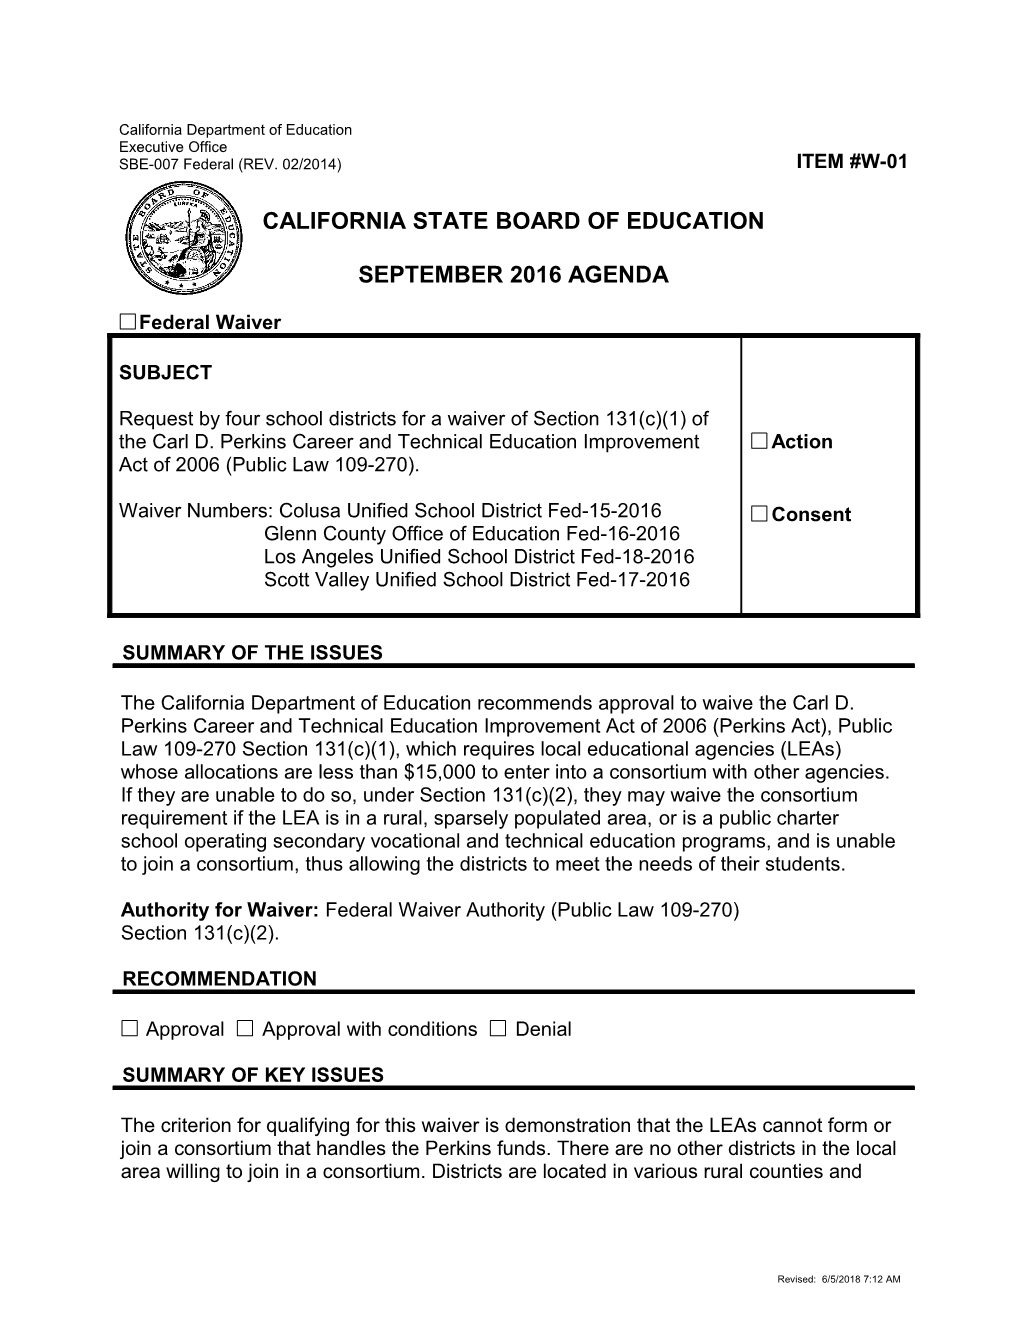 September 2016 Waiver Item W-01 - Meeting Agendas (CA State Board of Education)